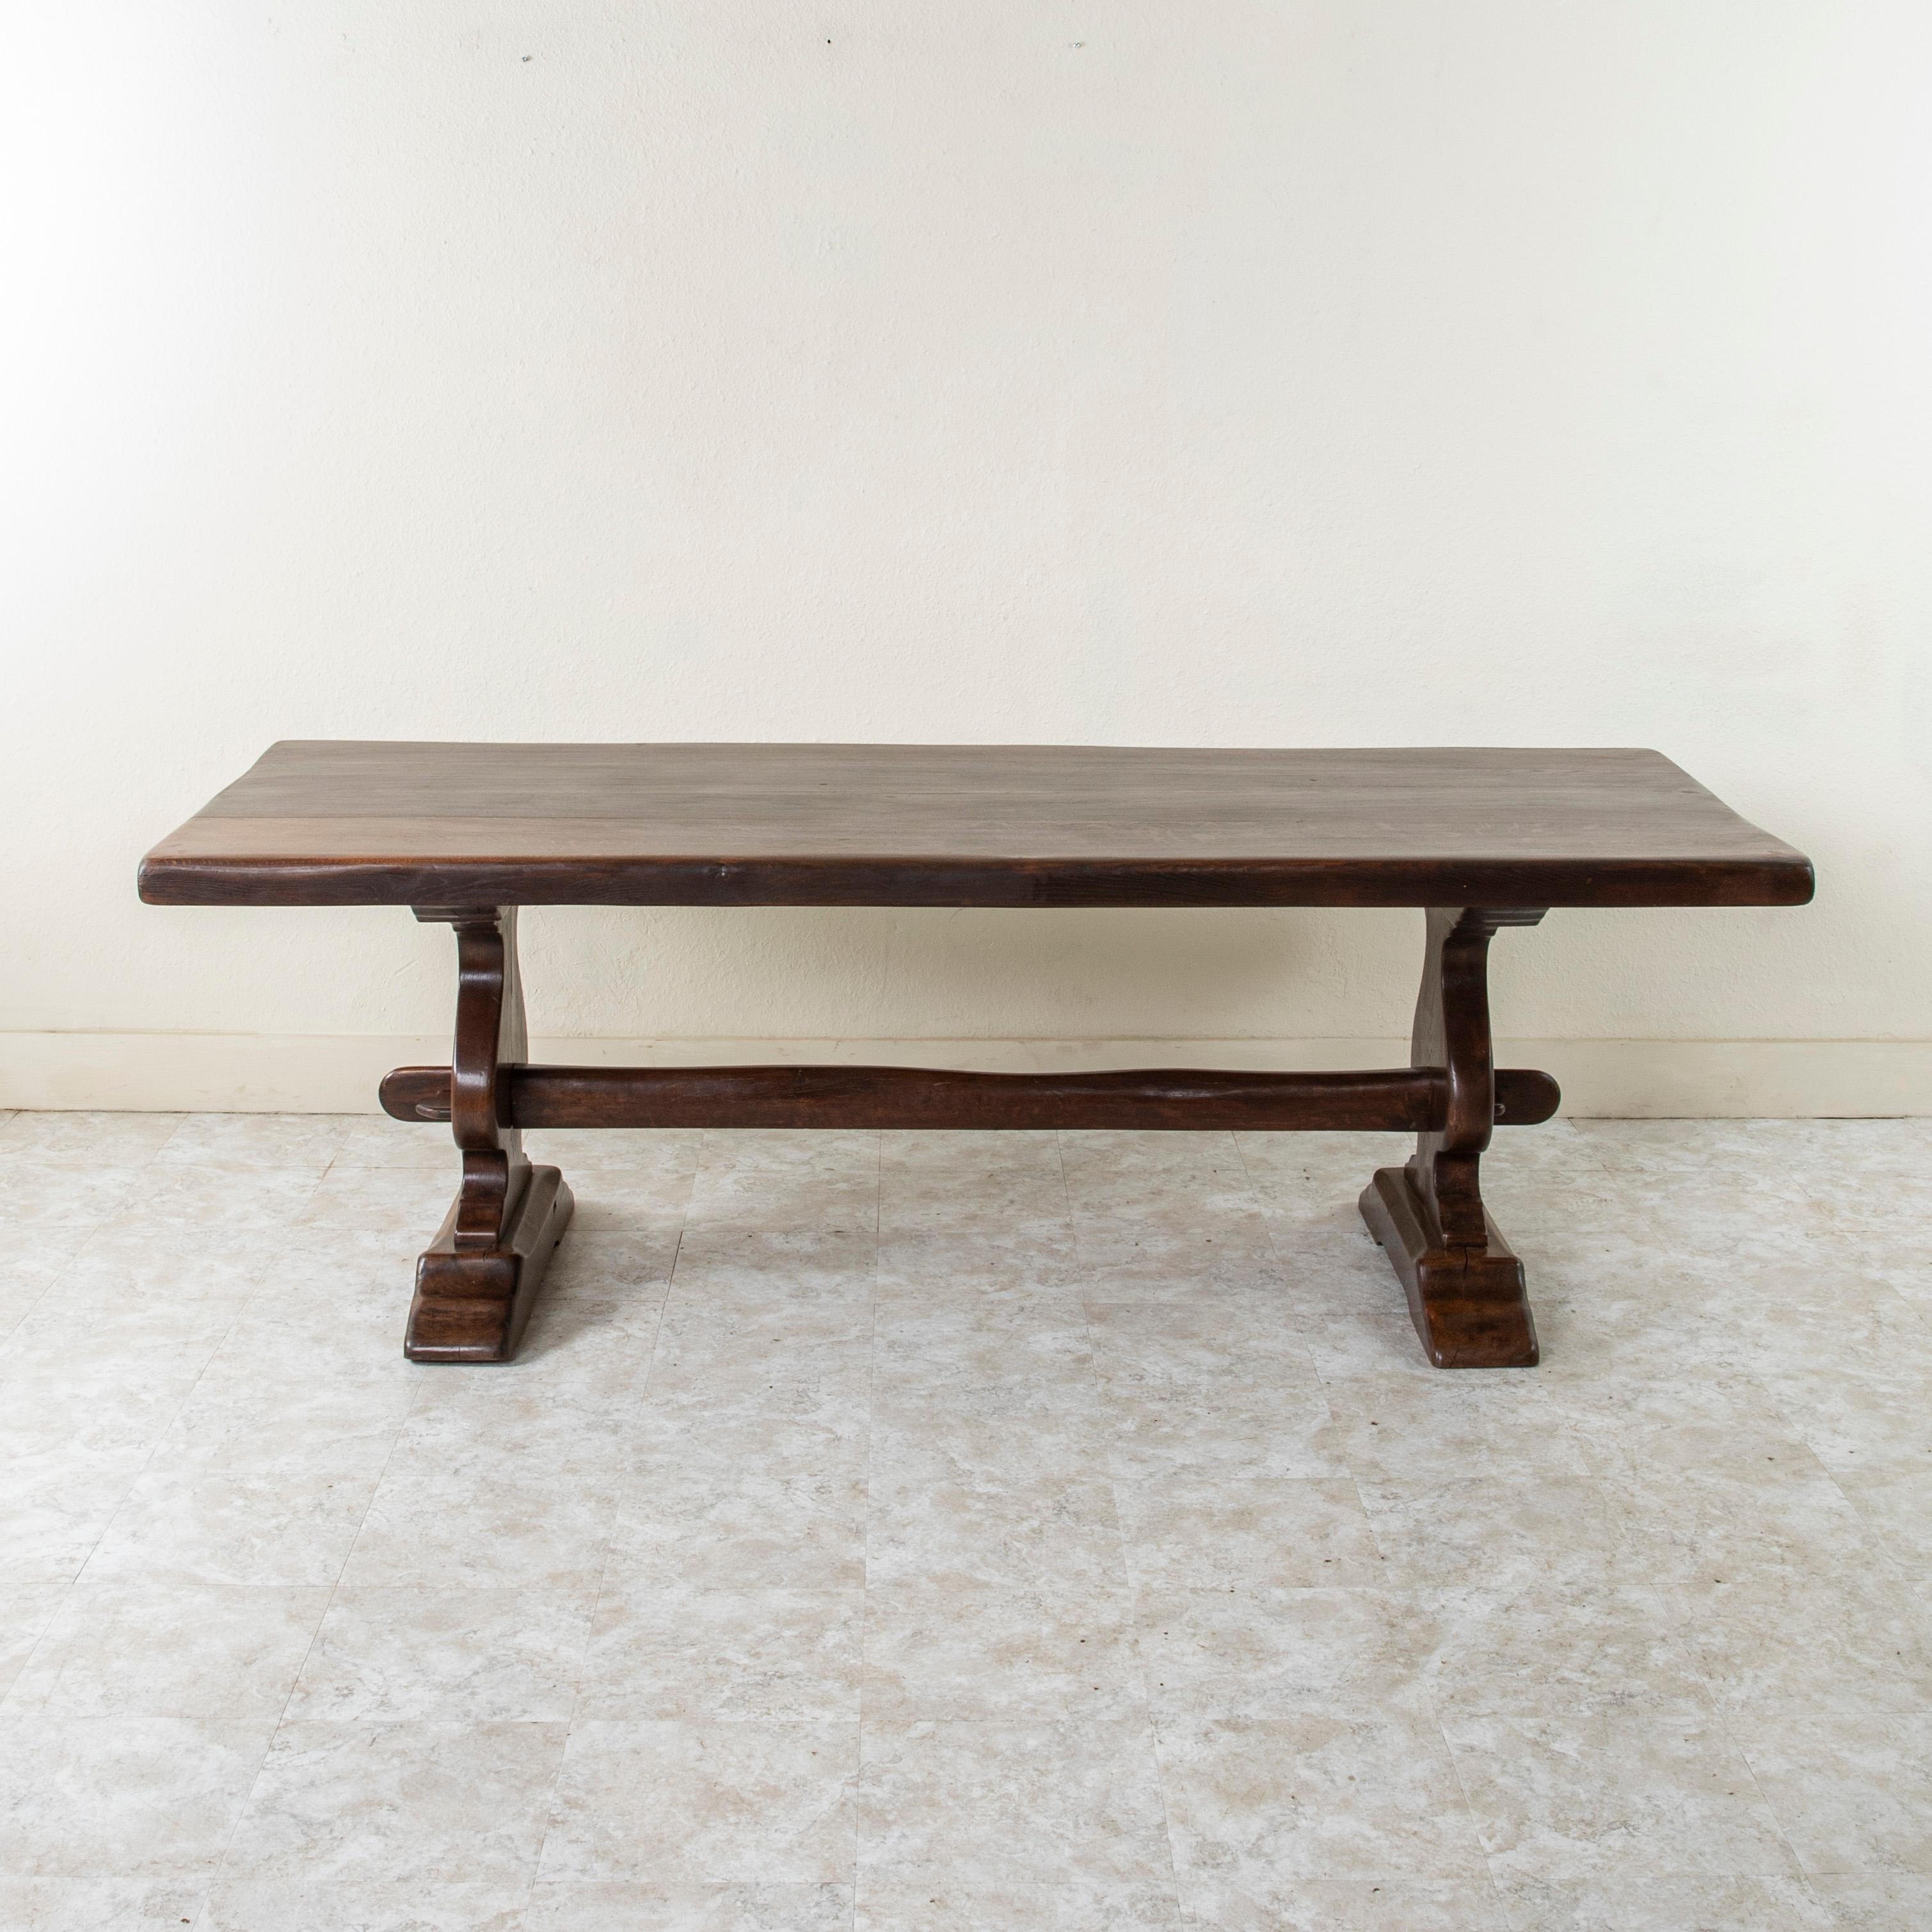 Found in the region of Normandy, France, this large artisan-made oak monastery table or dining table from the turn of the twentieth century features a 2.5 inch thick top constructed of four planks of wood. Three splines run the entire length of the